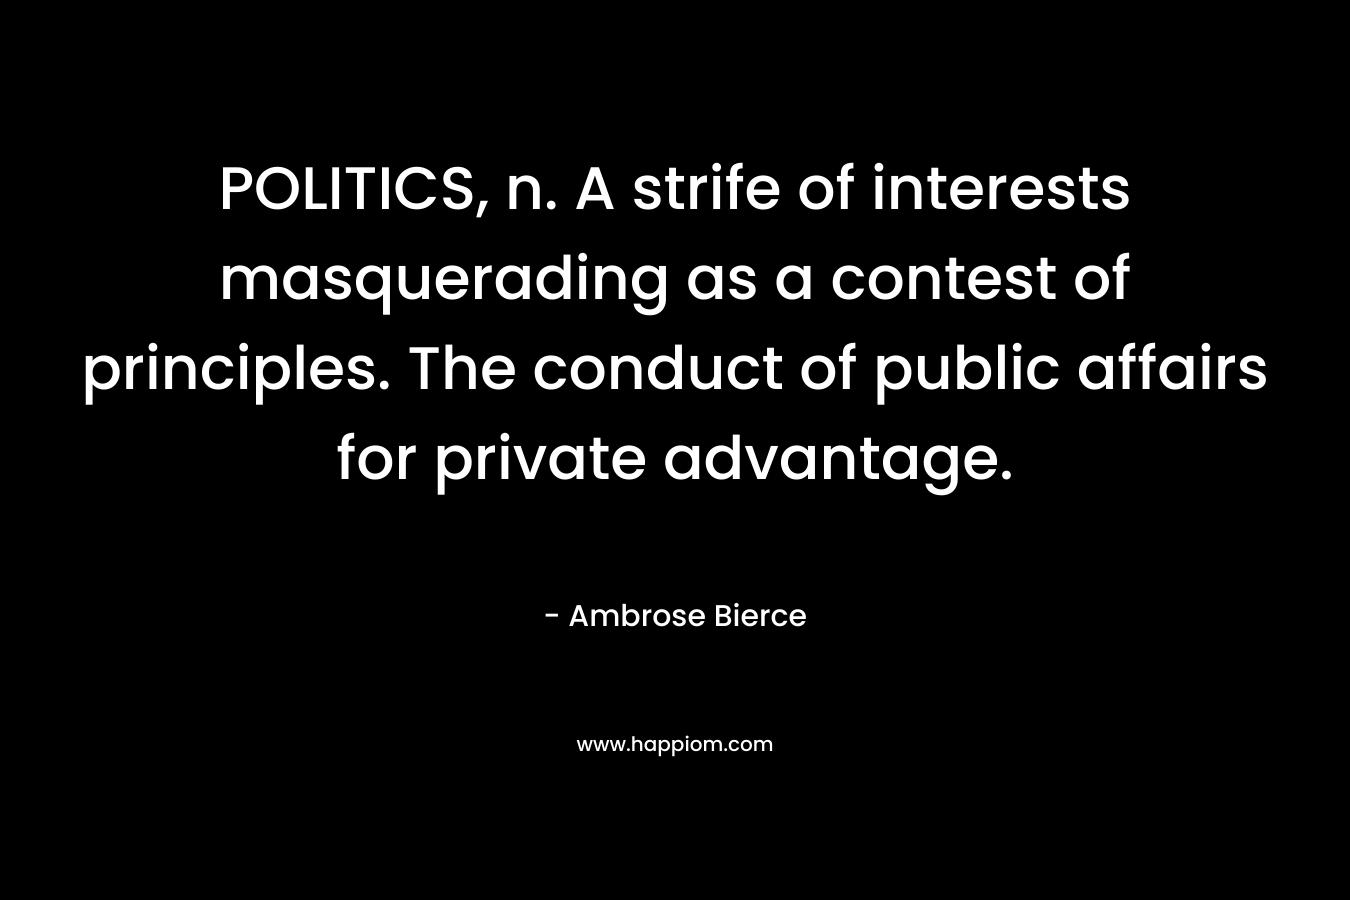 POLITICS, n. A strife of interests masquerading as a contest of principles. The conduct of public affairs for private advantage.